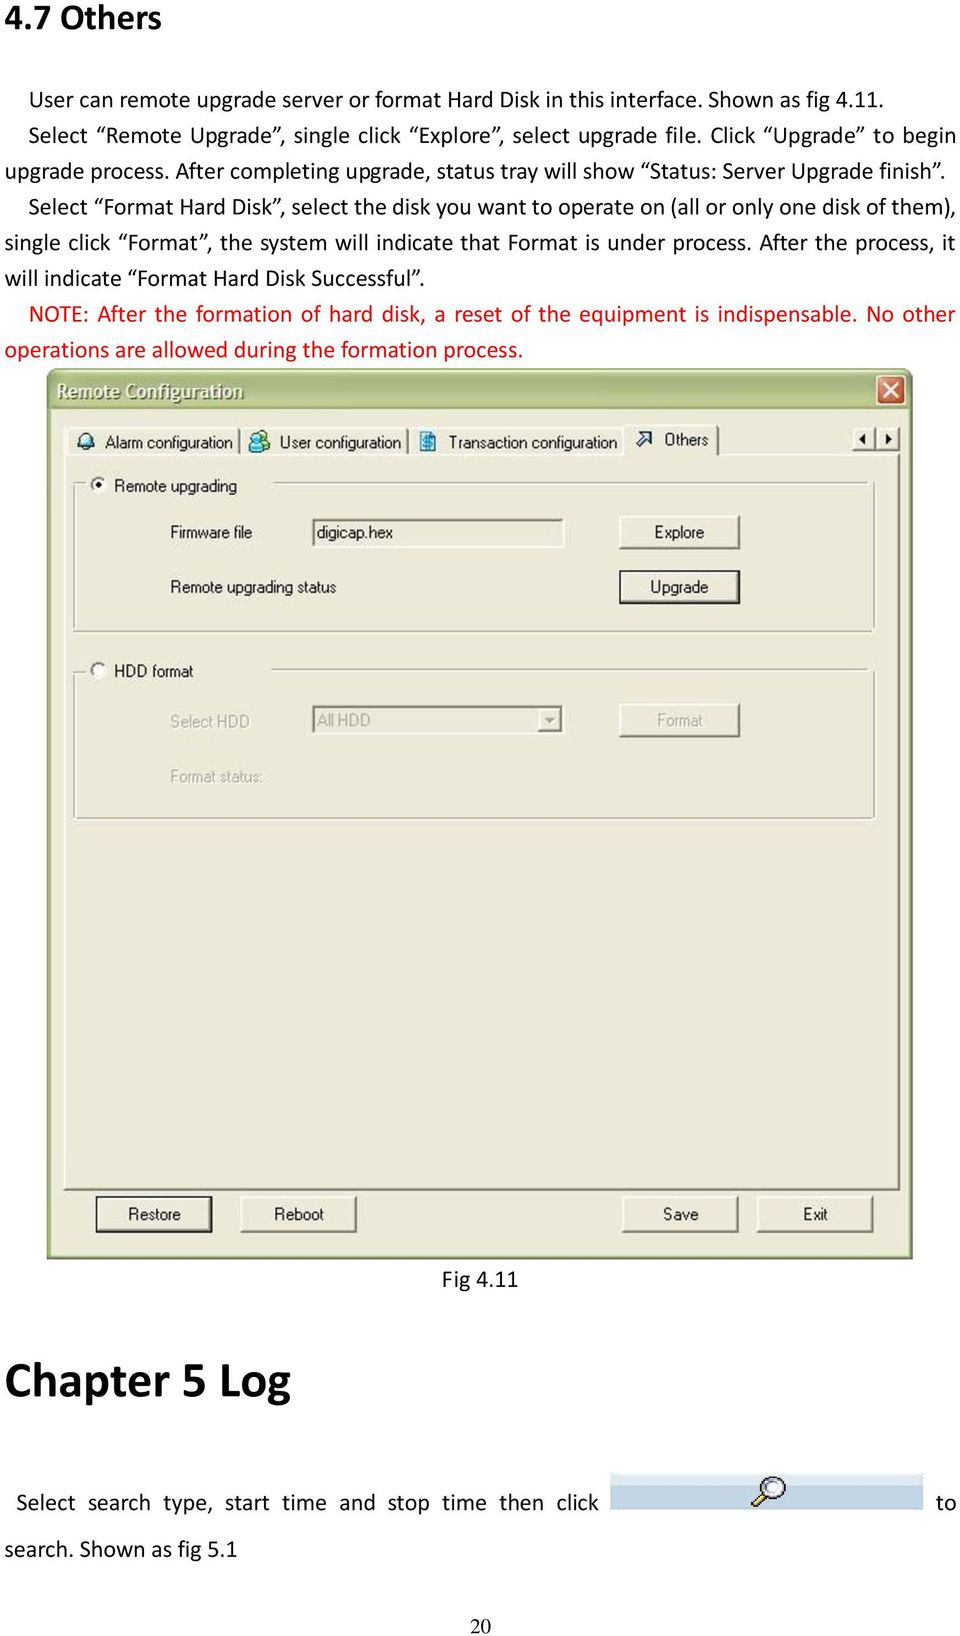 Select Format Hard Disk, select the disk you want to operate on (all or only one disk of them), single click Format, the system will indicate that Format is under process.